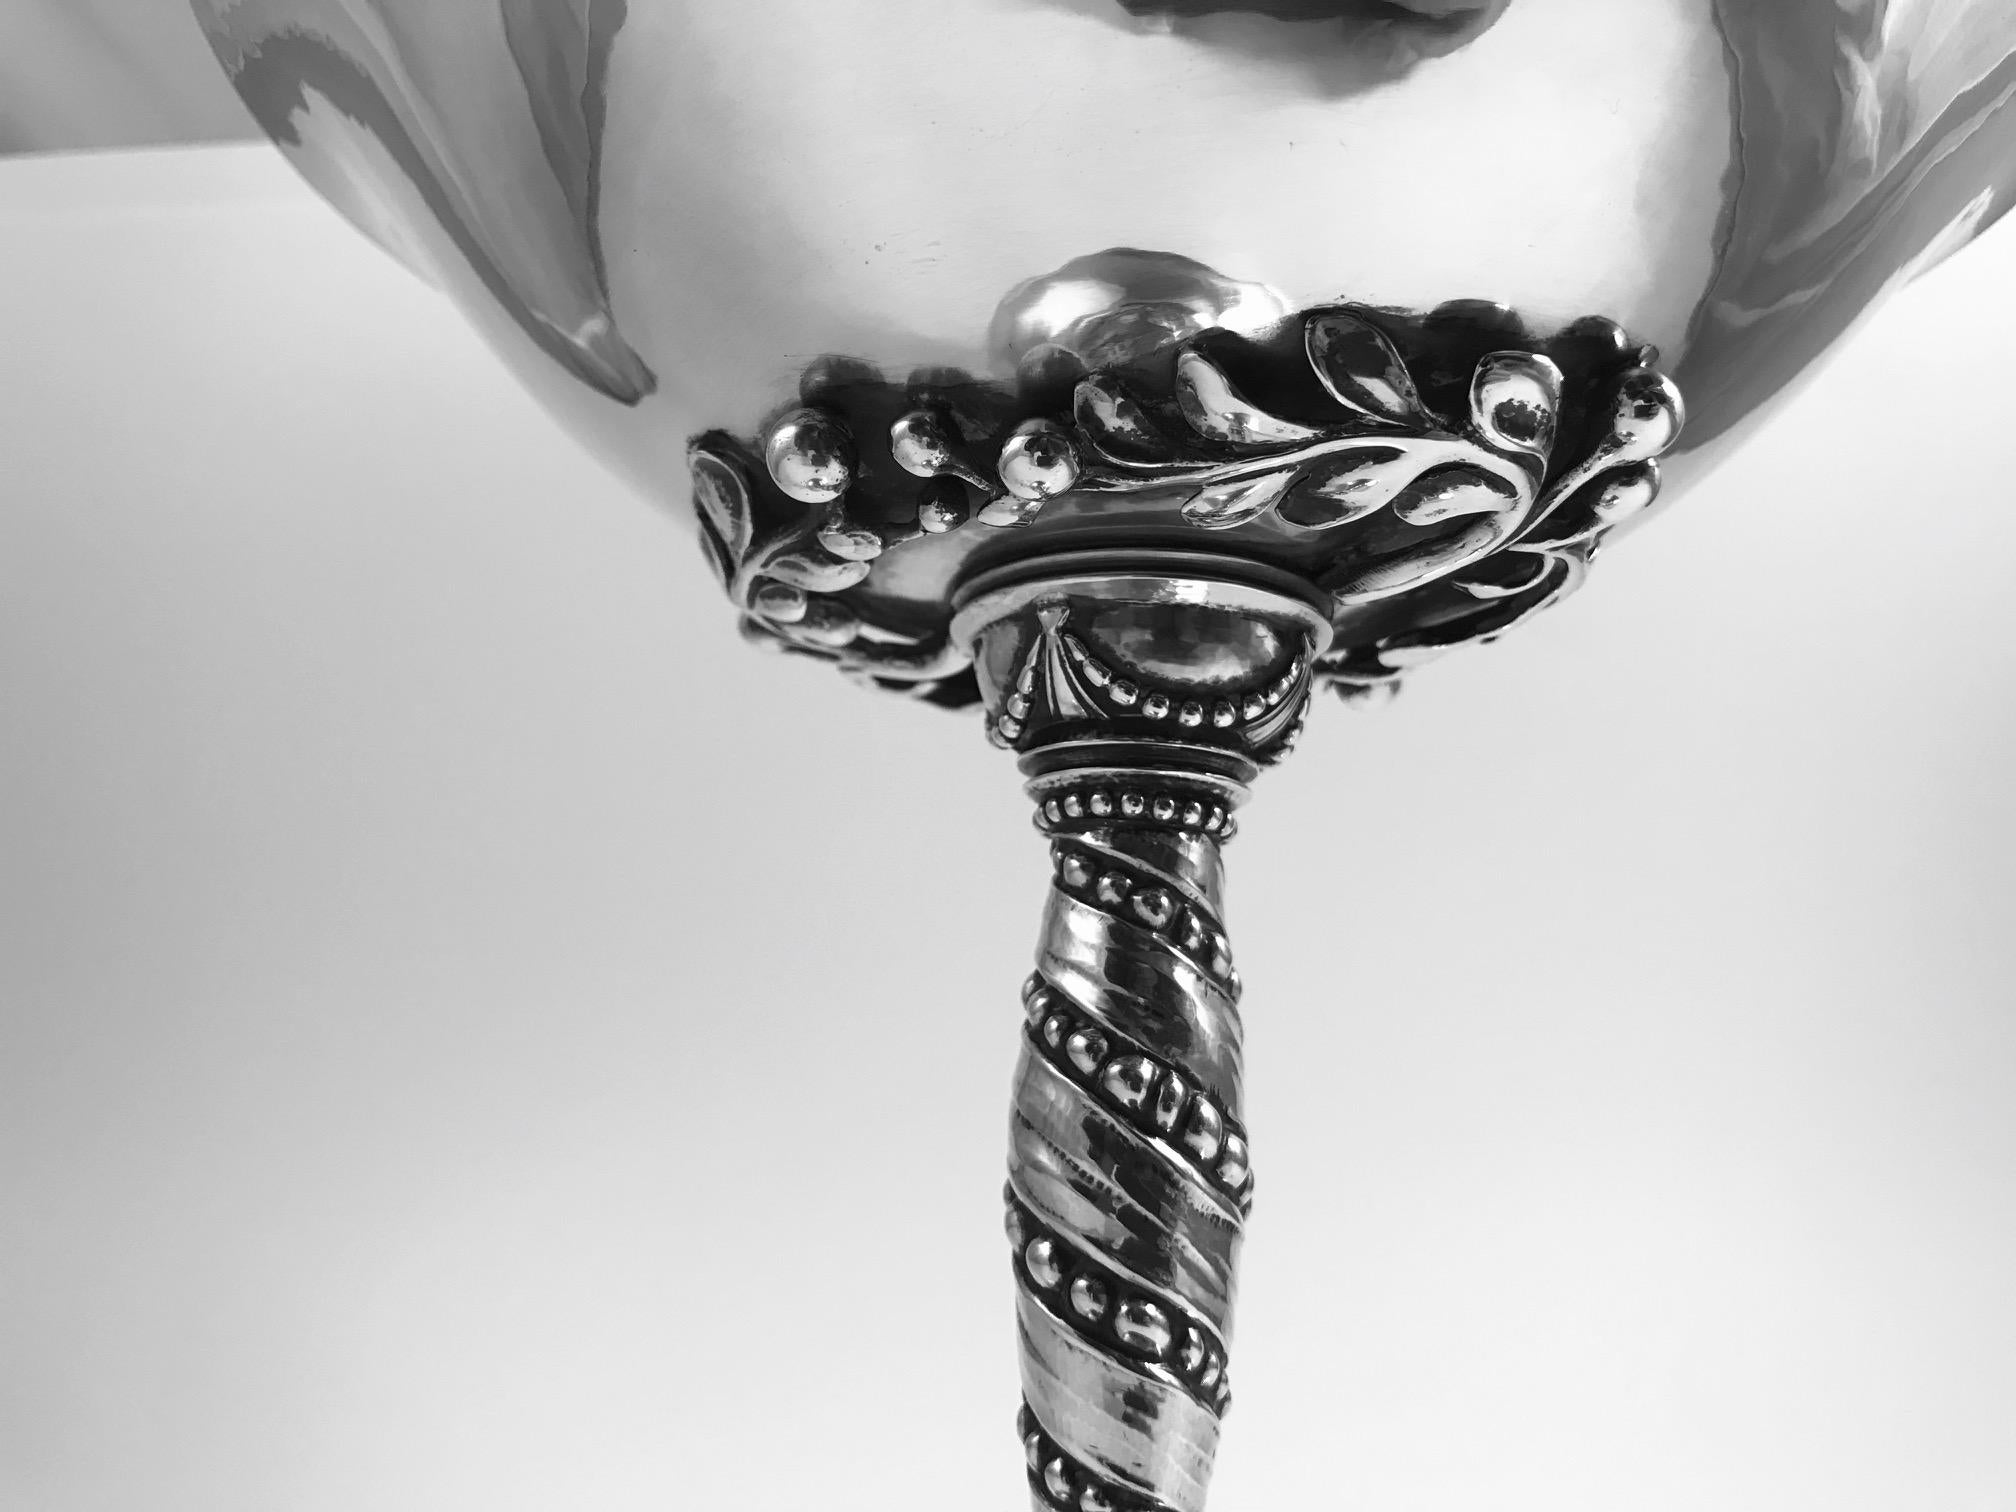 This is an antique 830 silver Georg Jensen compote with spiralled stem and elaborate leafy decoration under the bowl, design #178 by Johan Rohde from circa 1915. To find a piece like this with fabrication date one year after the design date is